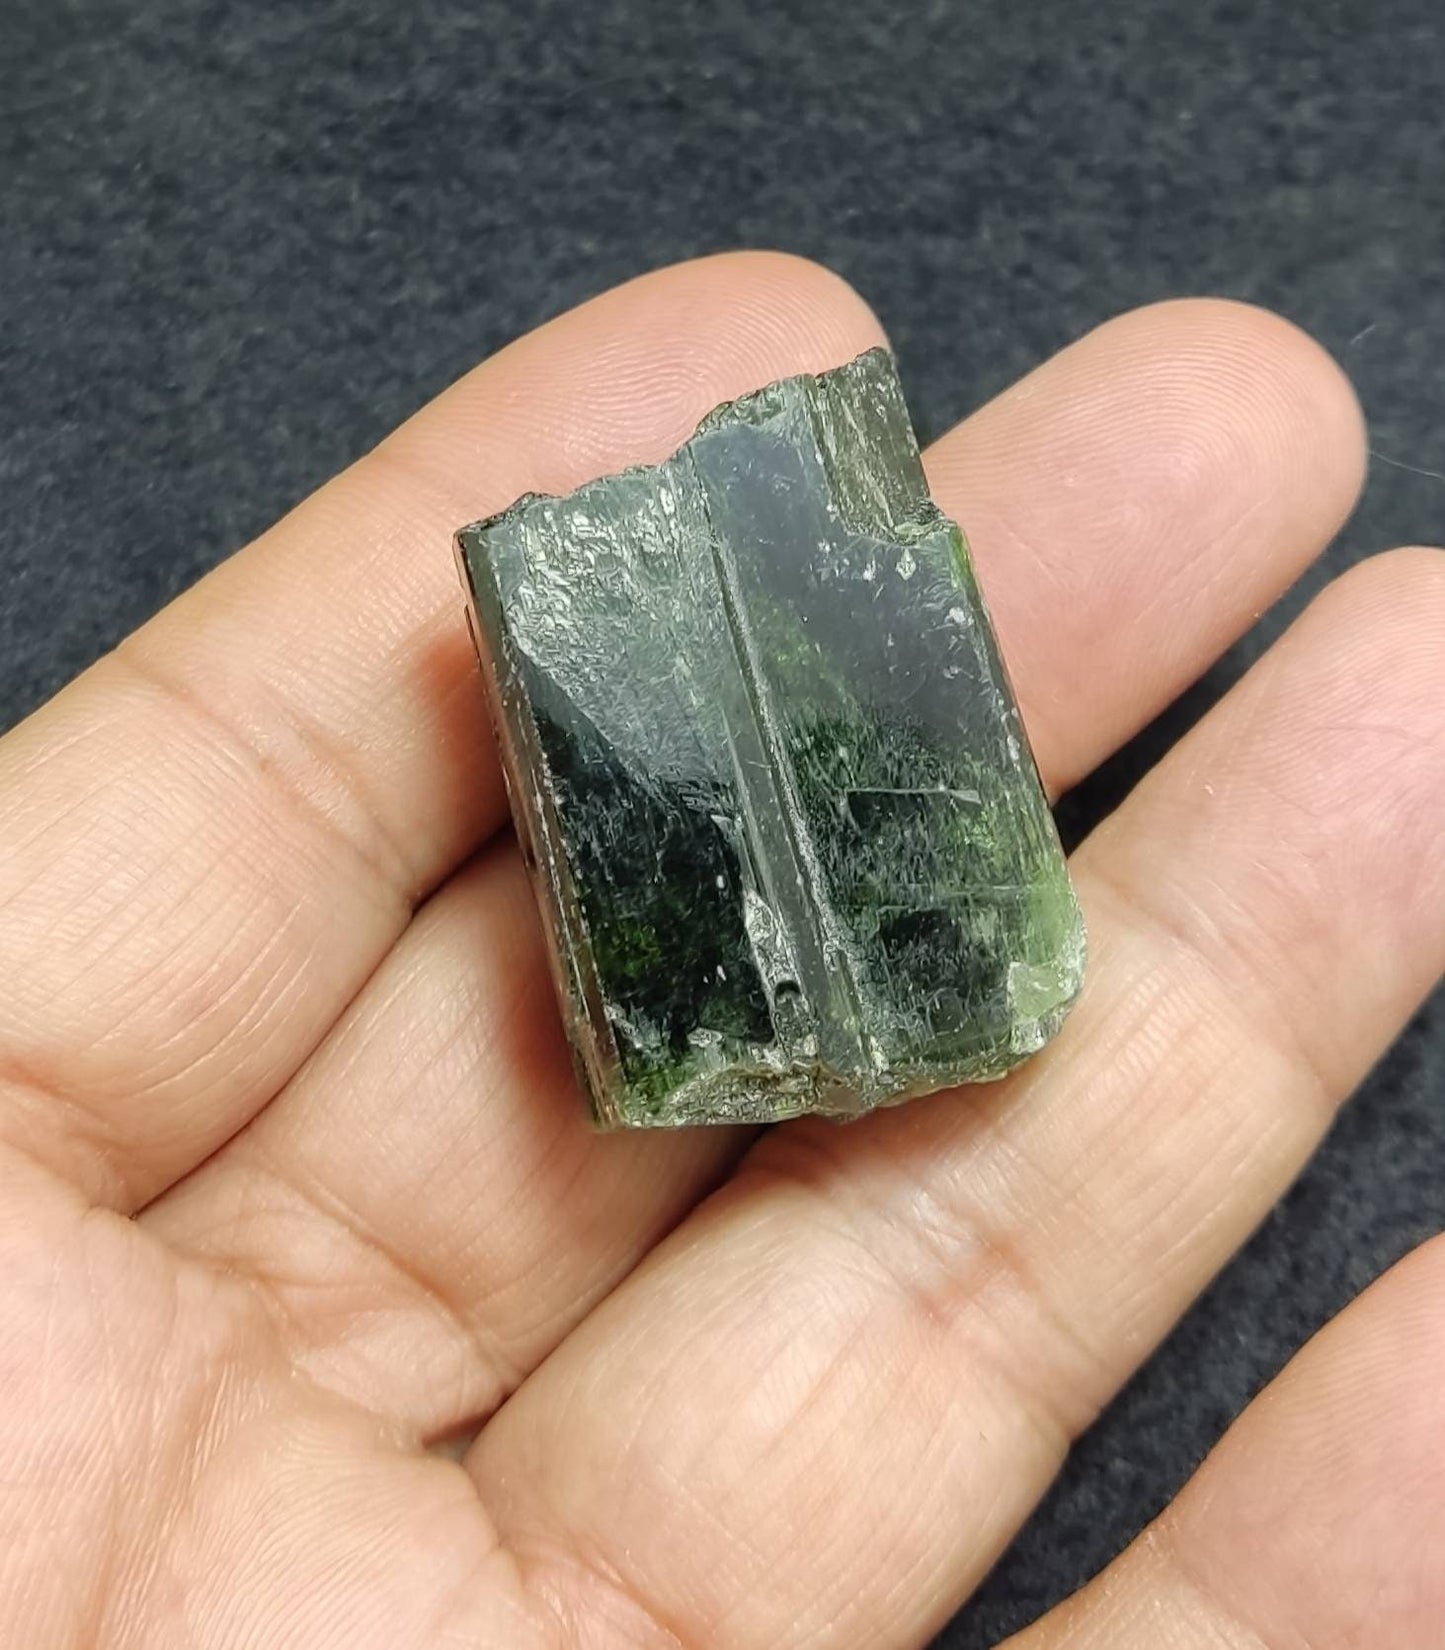 An amazing specimen of diopside crystal 40 grams